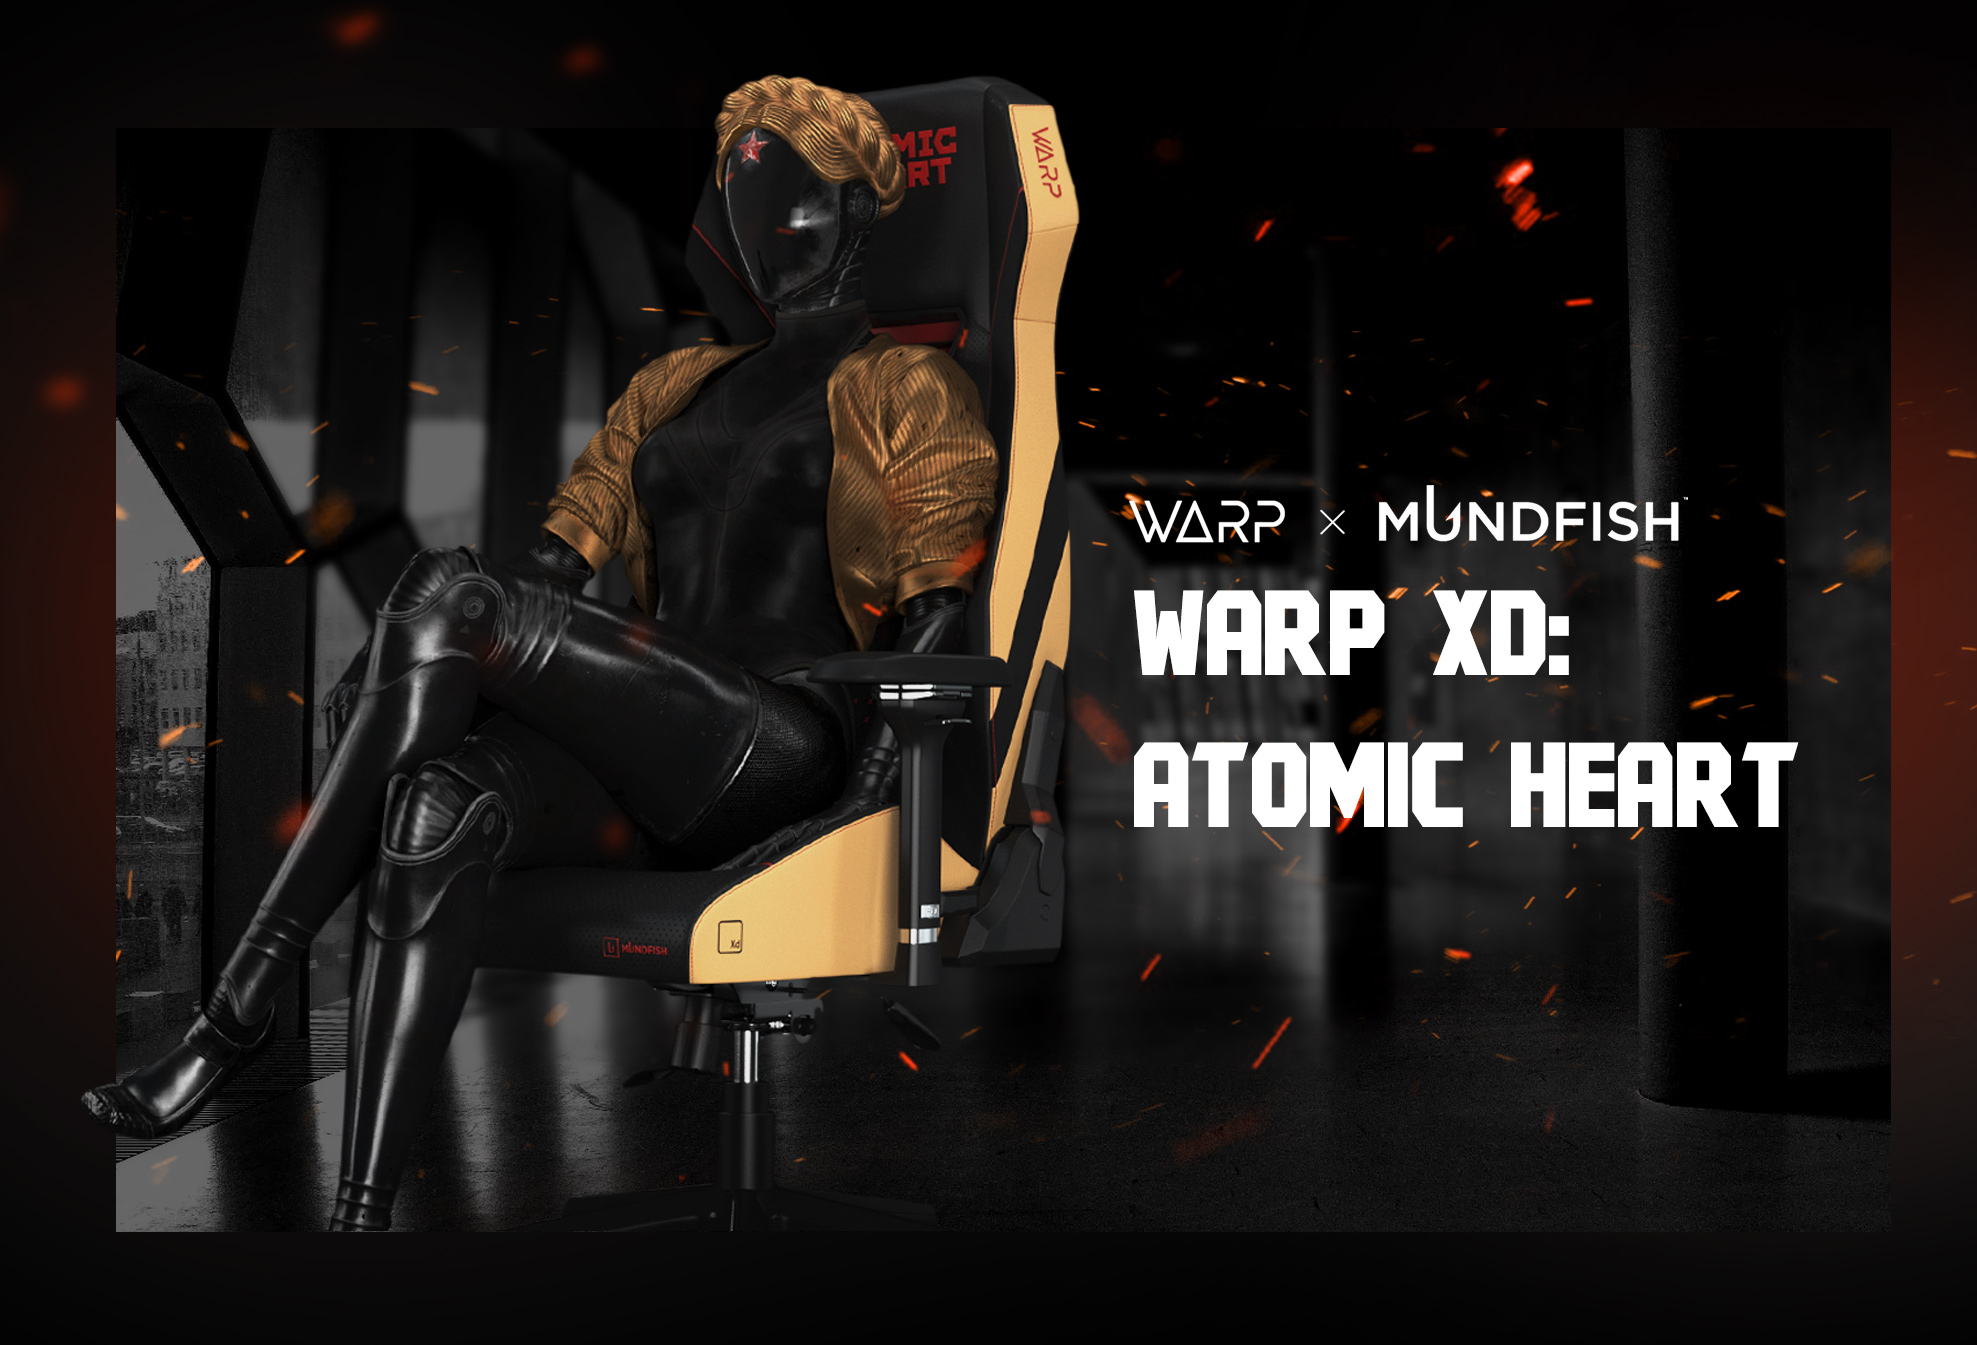 WARP and Mundfish introduced the Xd Atomic Heart gaming chair